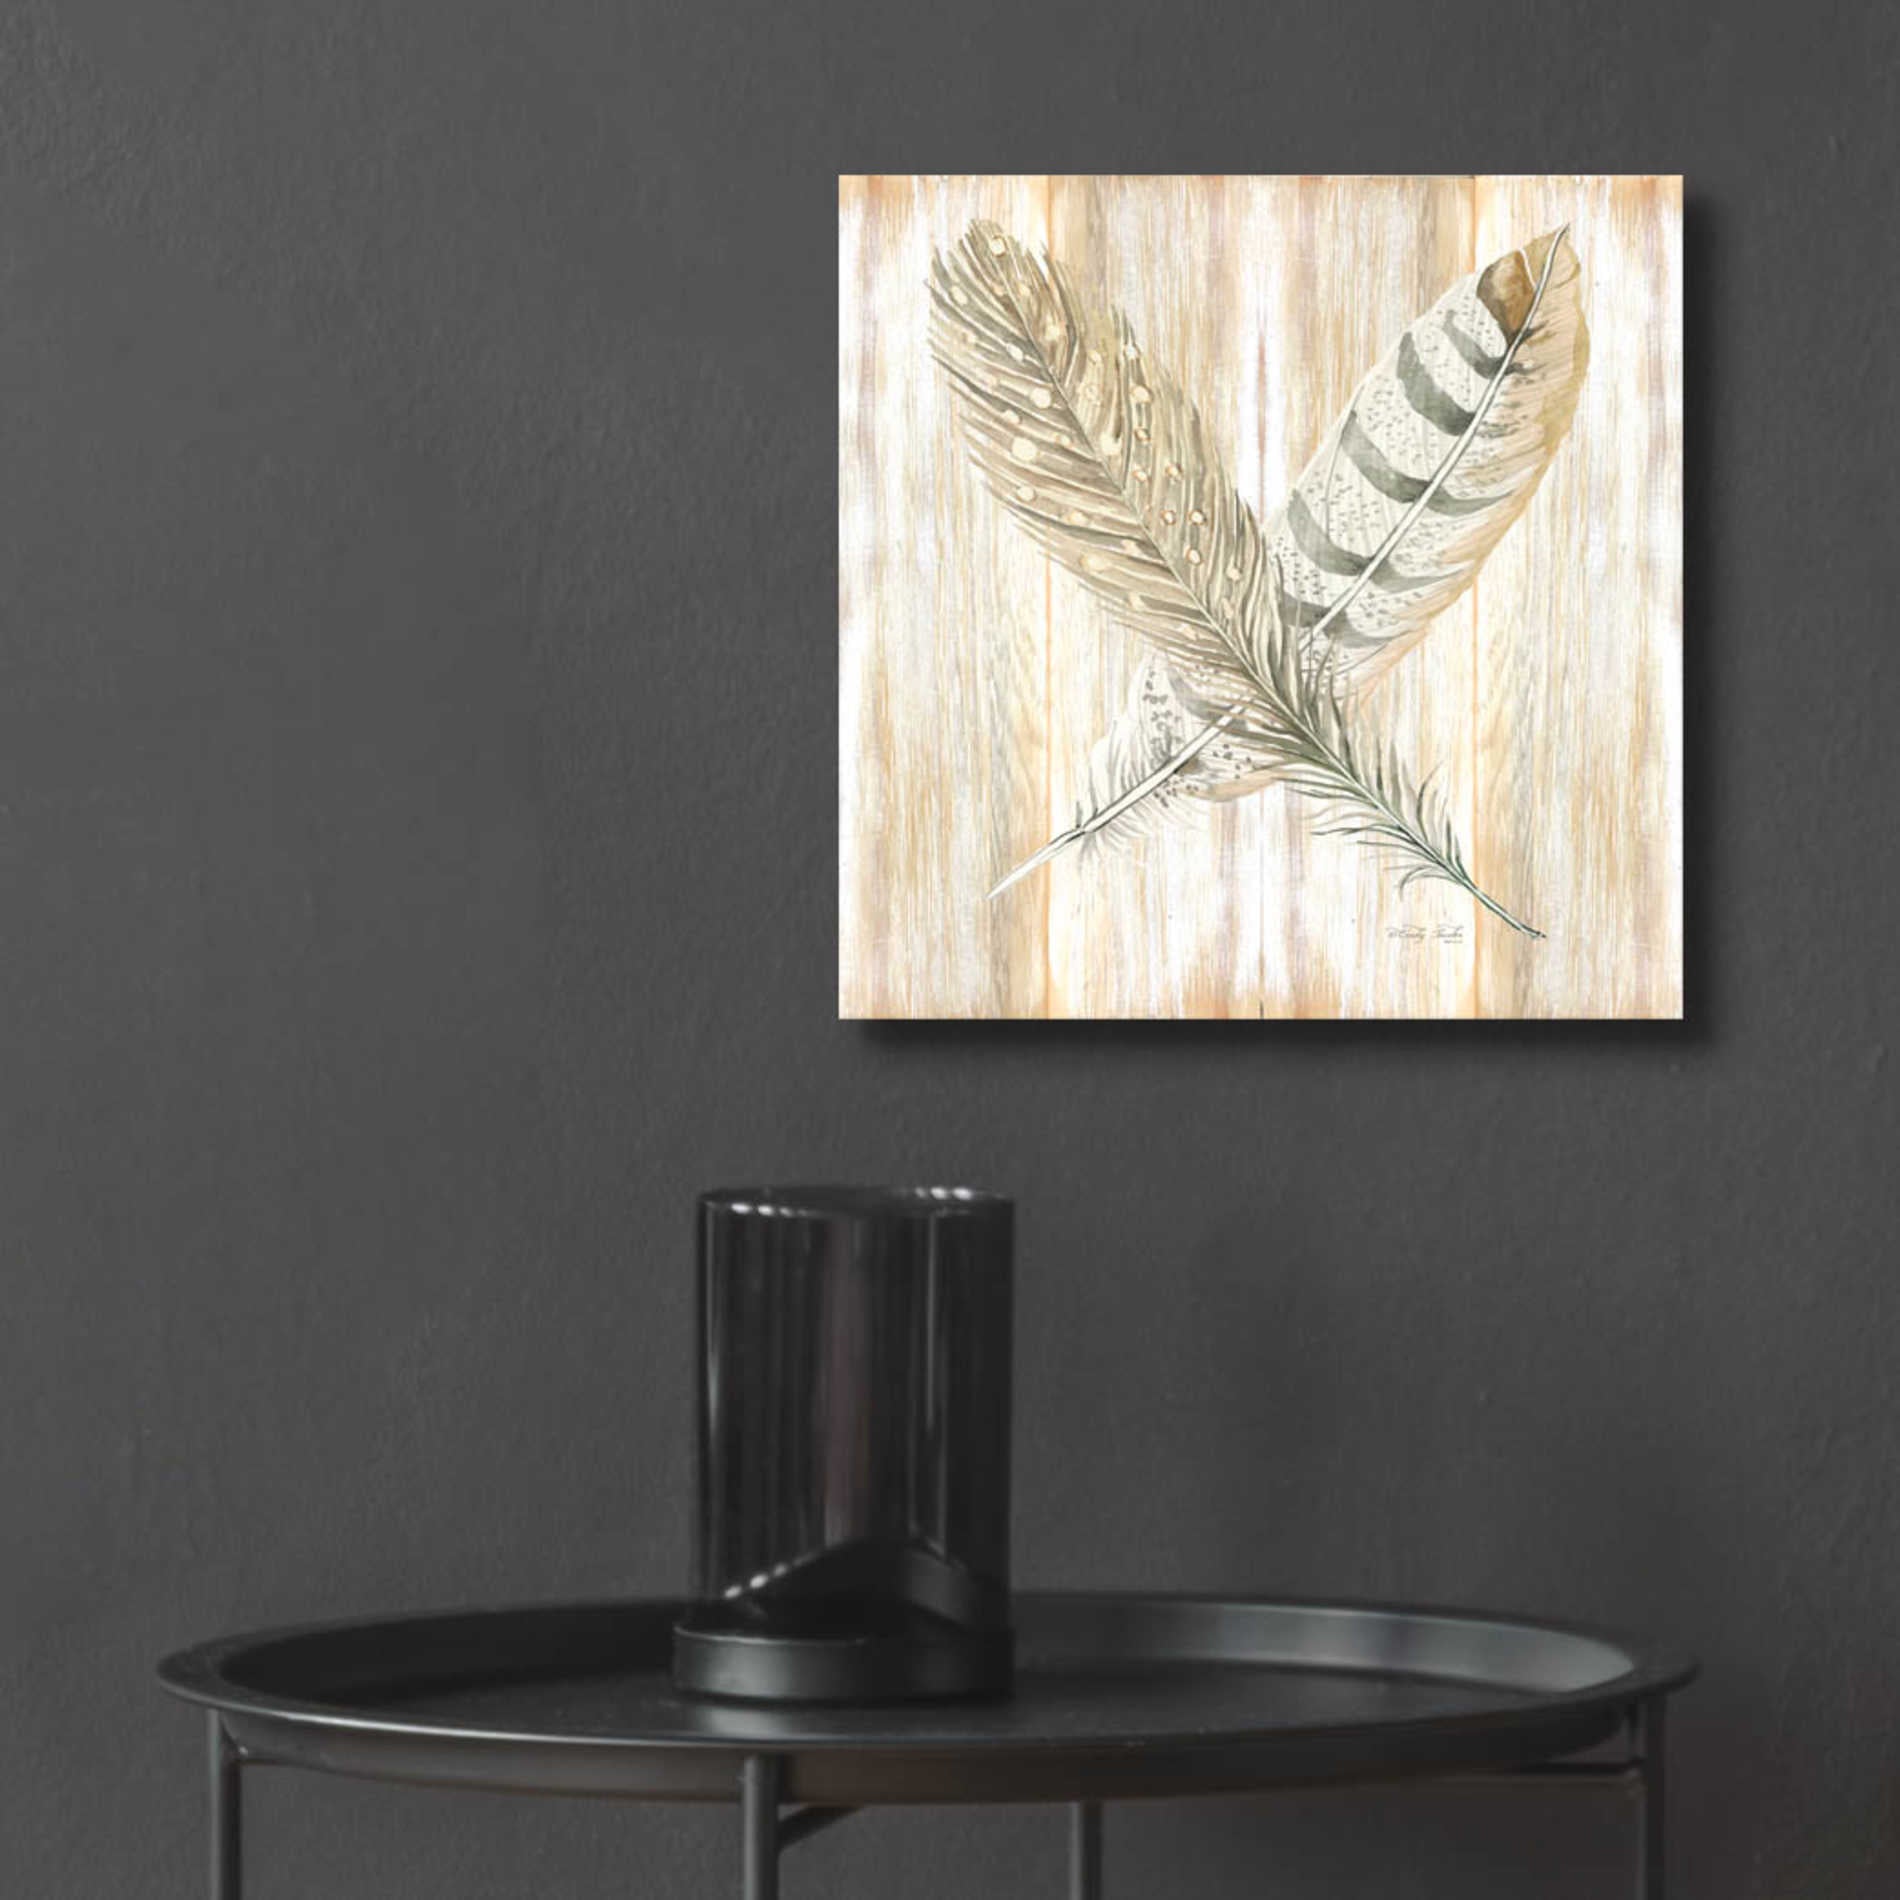 Epic Art 'Feathers Crossed II' by Cindy Jacobs, Acrylic Glass Wall Art,12x12